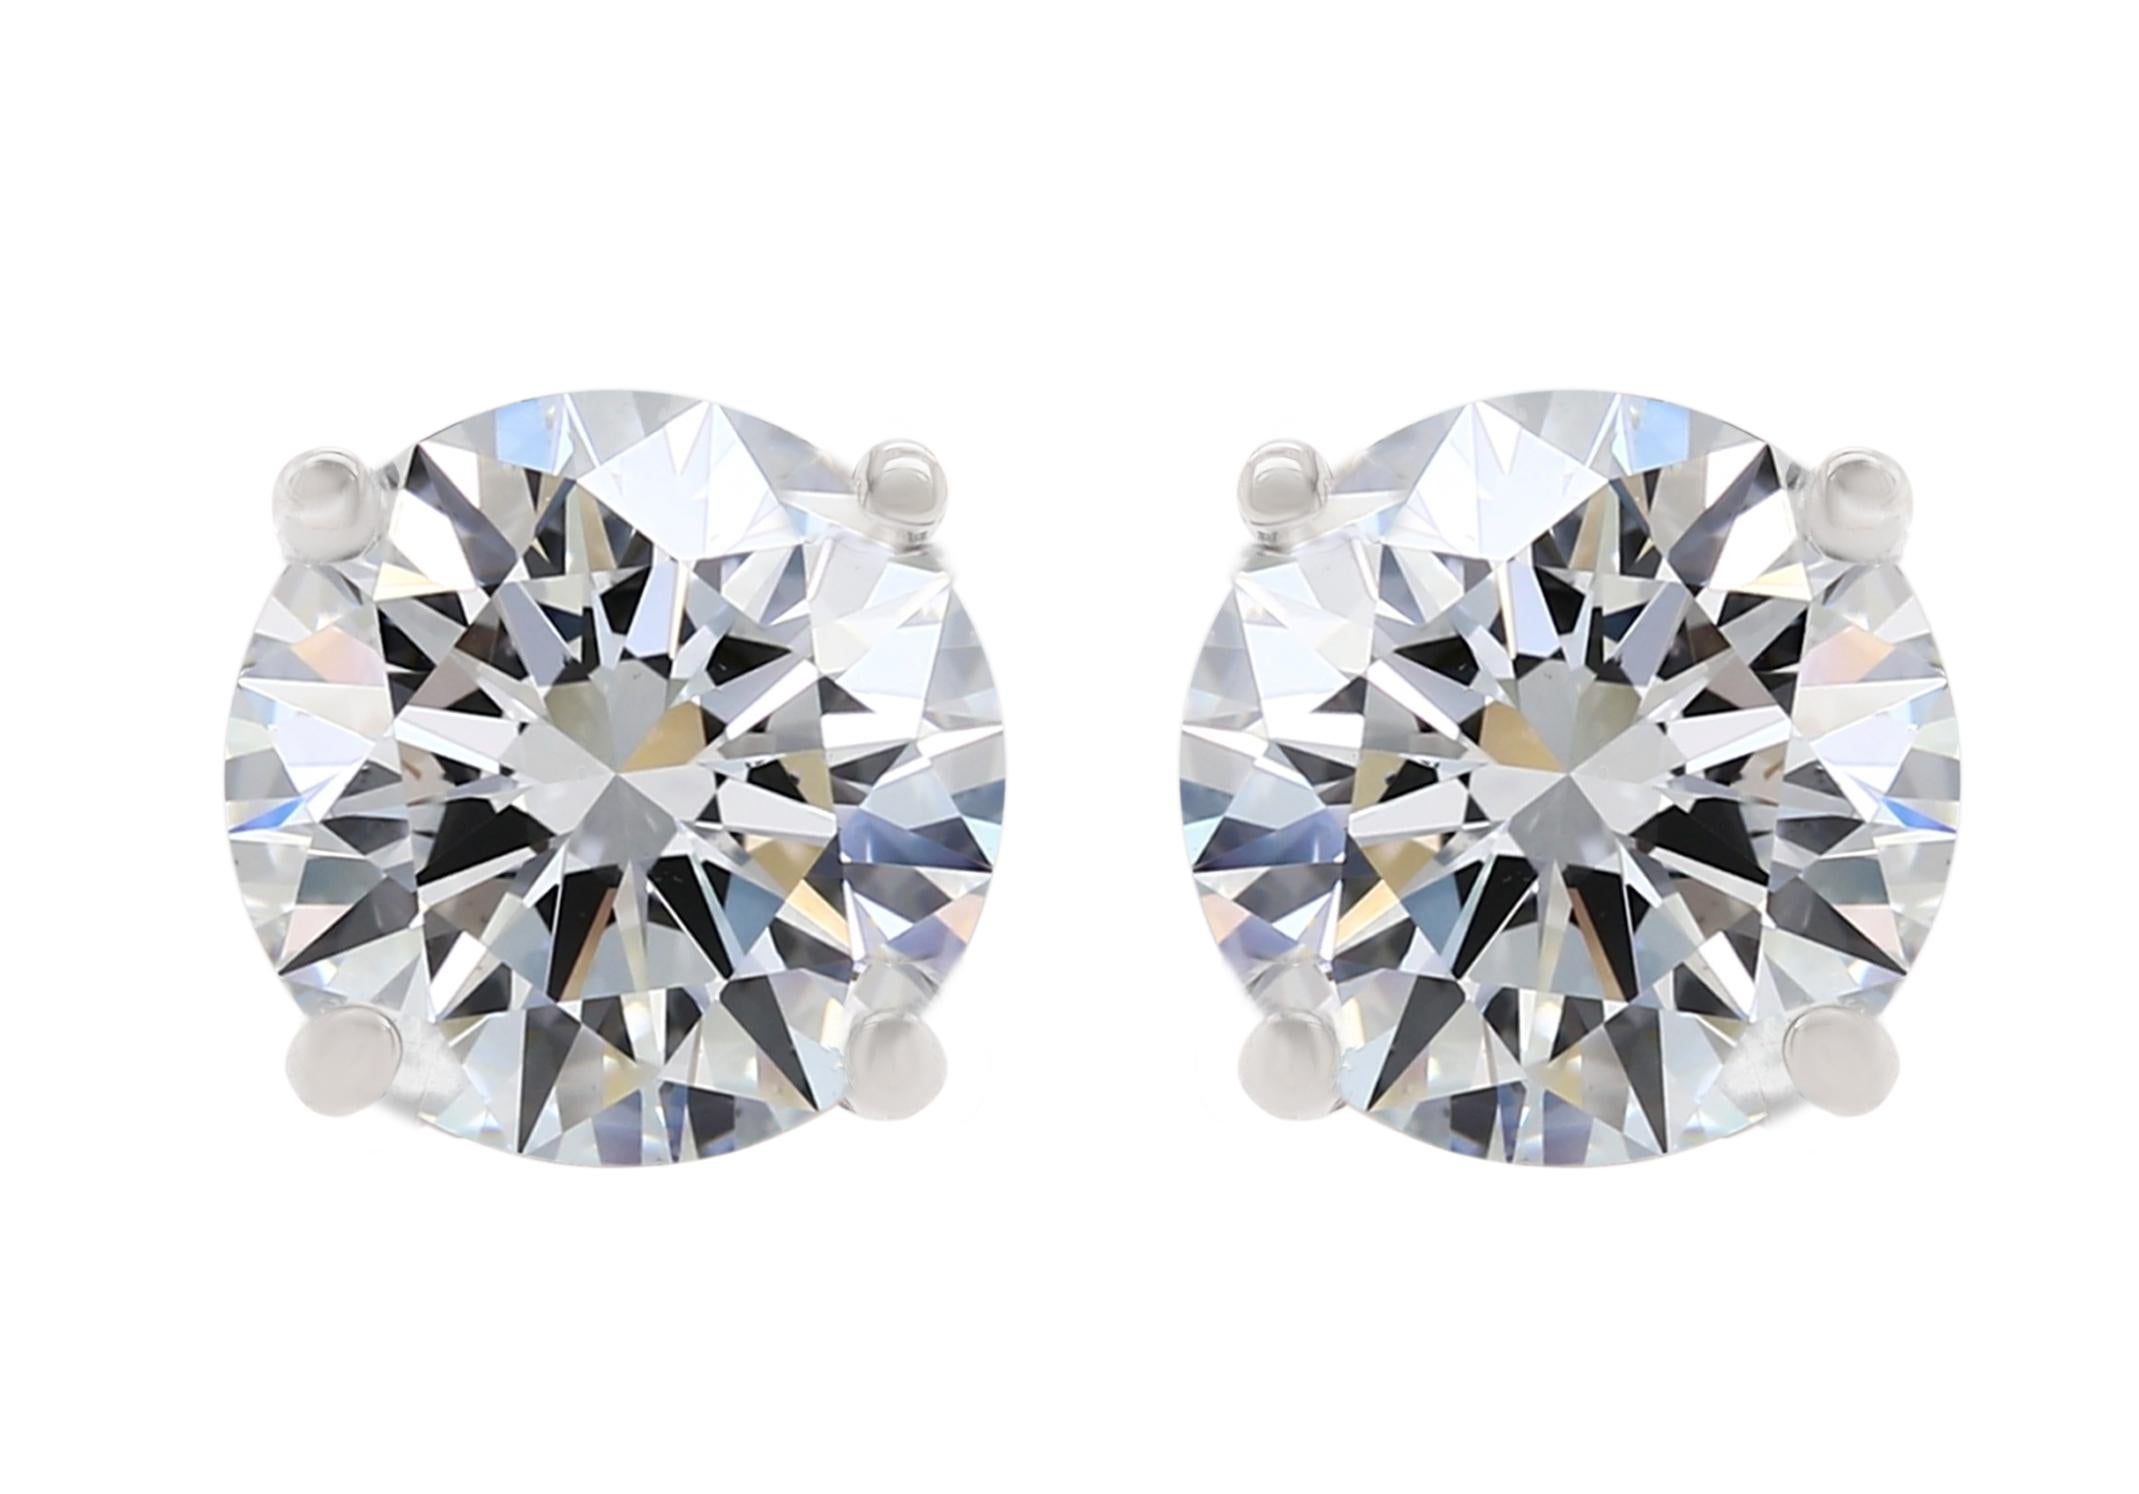 18KT DIAMOND STUDS 5.62CT 4-PRONG MOUNTING NEAR COLORLESS WHITE 
Diana M. is a leading supplier of top-quality fine jewelry for over 35 years.
Diana M is one-stop shop for all your jewelry shopping, carrying line of diamond rings, earrings,